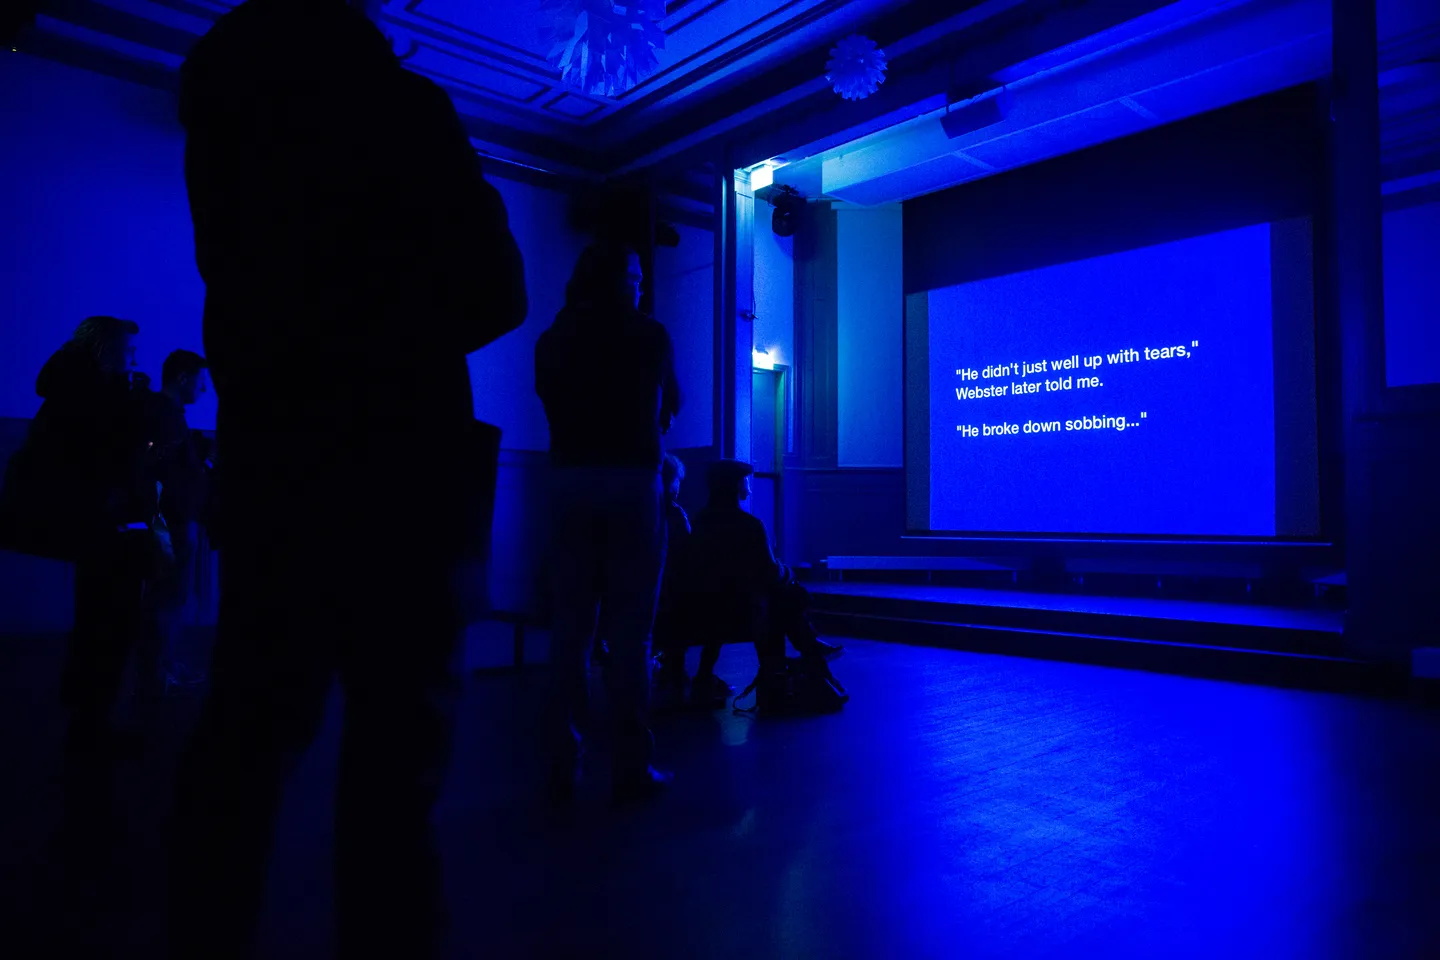 An audience looking at the projection of a text on a bright blue background “He didn’t just well up with tears, Webster later told me. He broke down sobbing…”